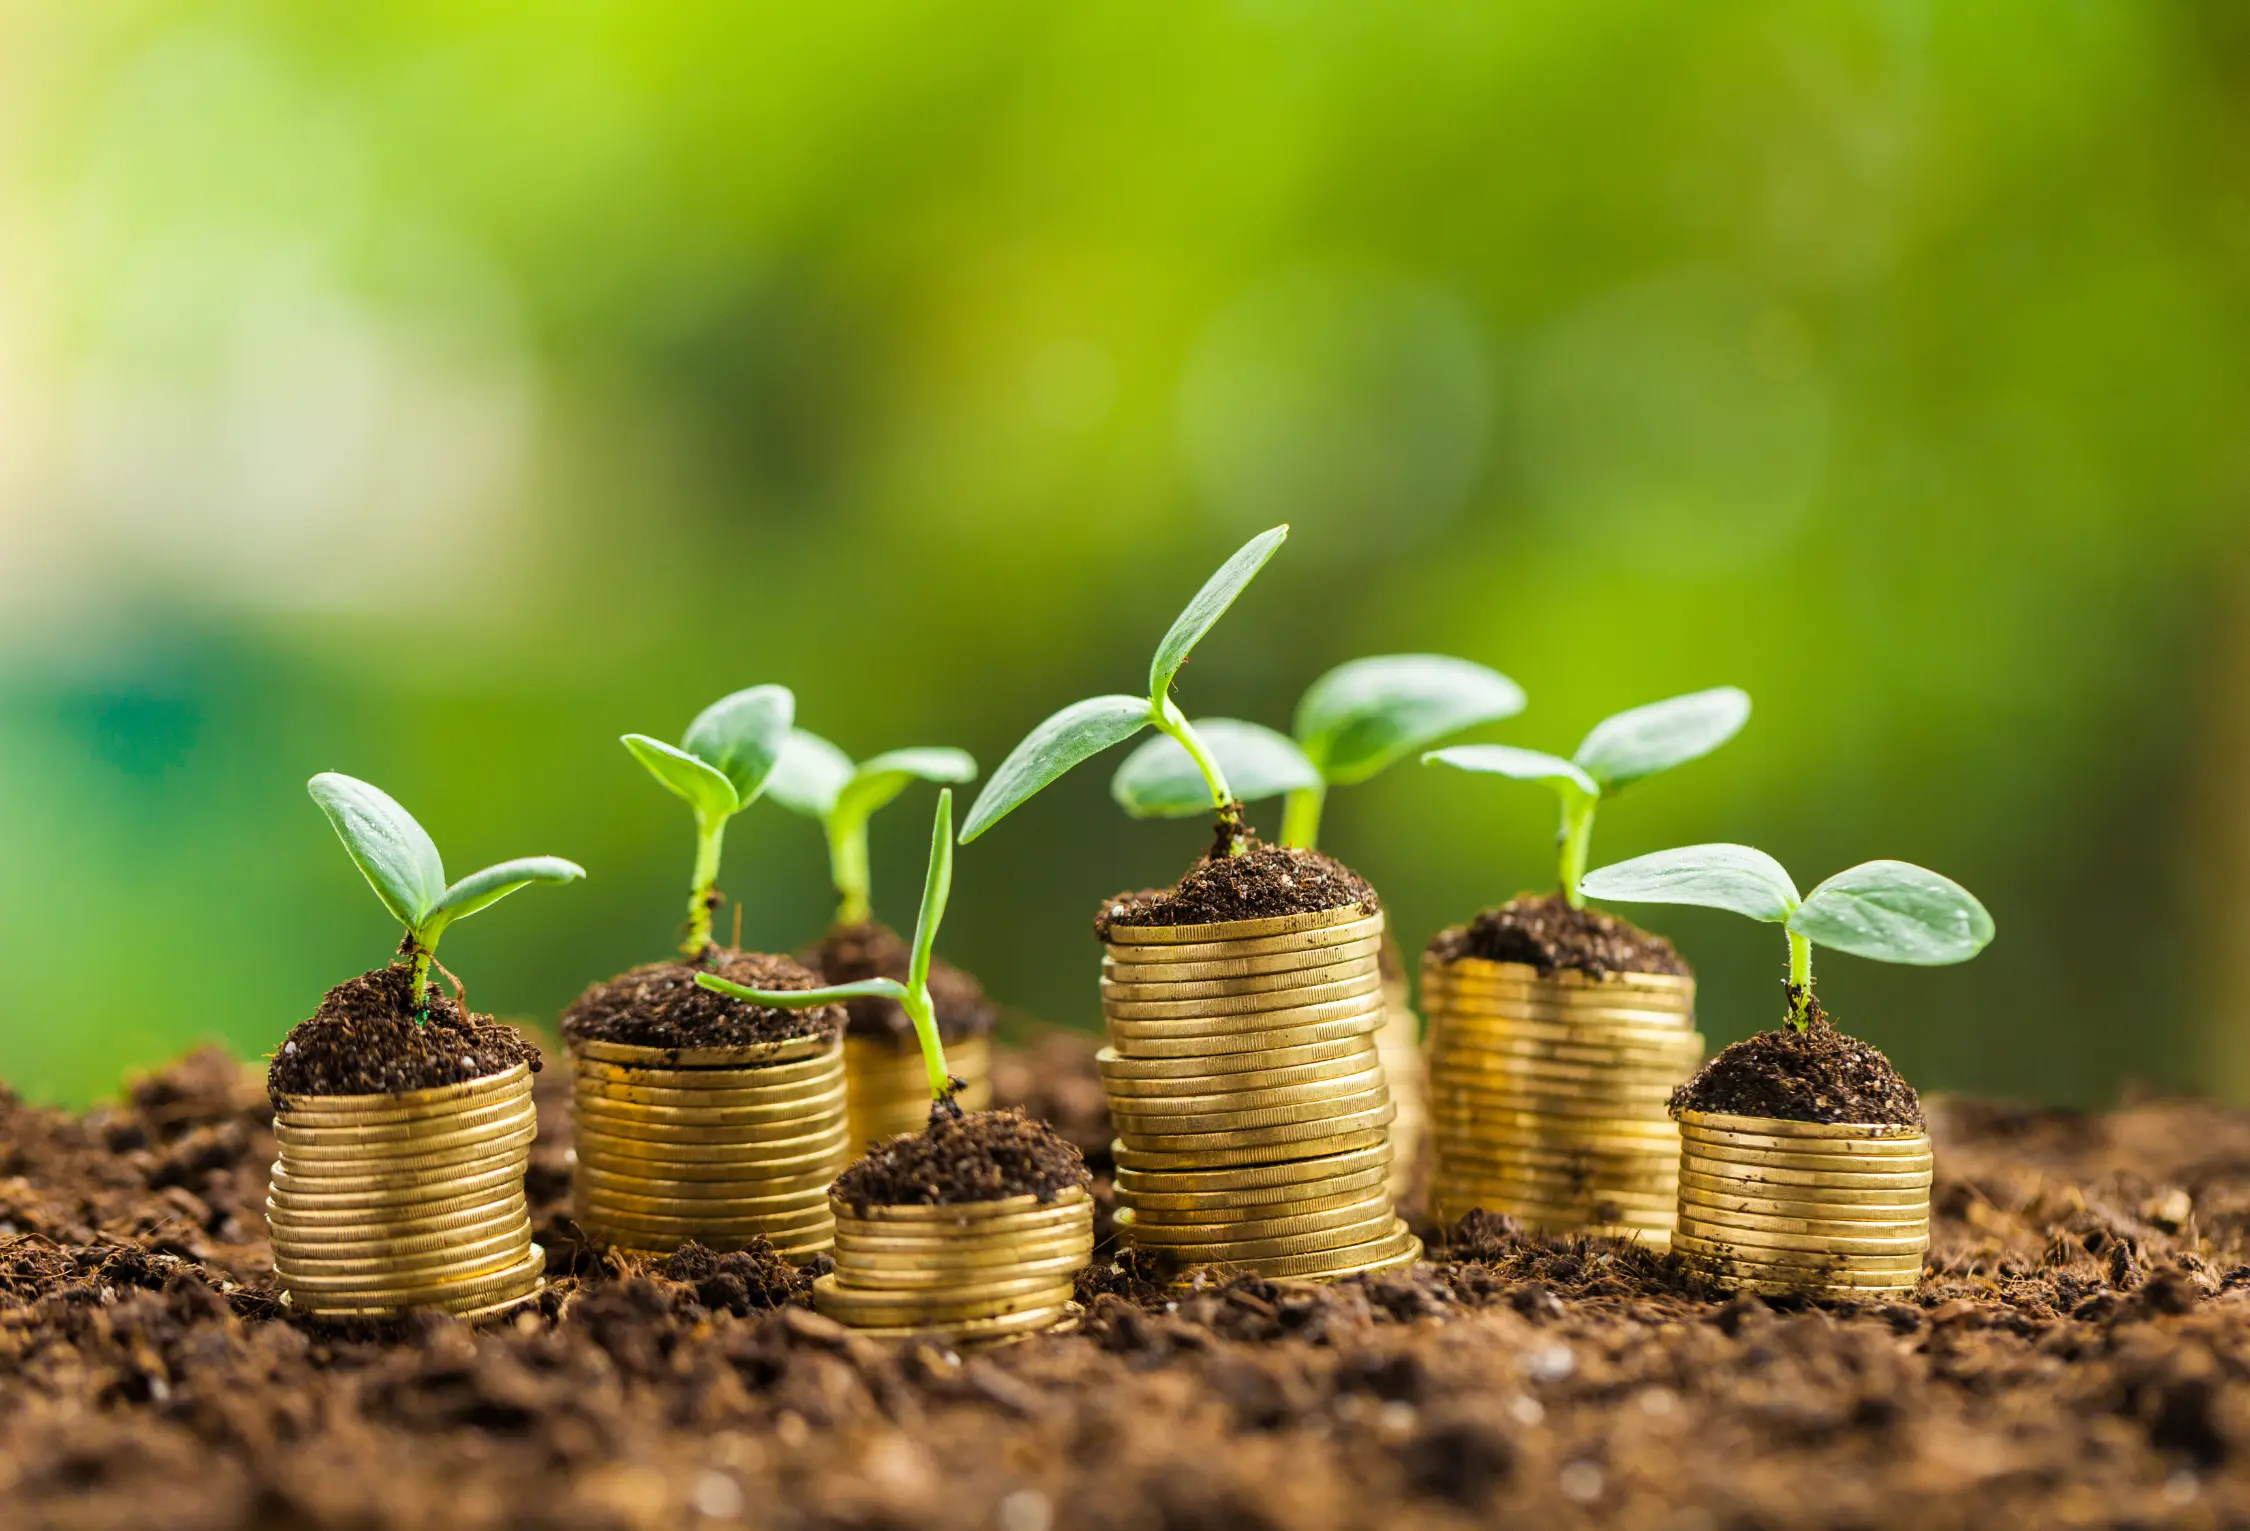 Image: Small plants growing in their pots, laying on sand, portraying Green Finance framework